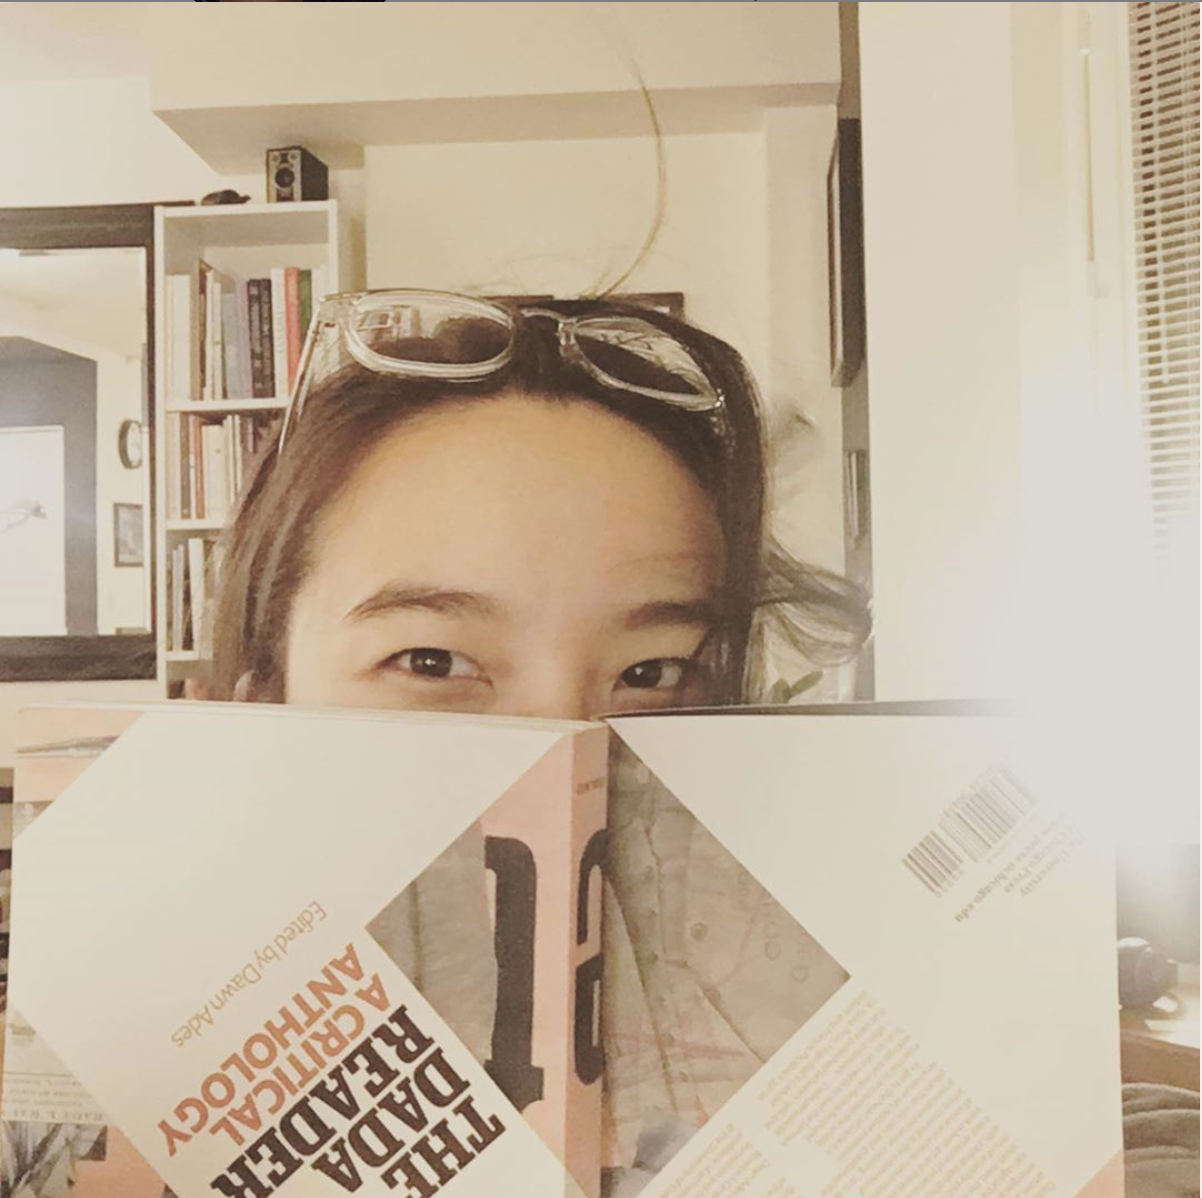 Ellen Chang-Richardson is hiding behind a book cover so you can only see their eyes and the top of their head with dark hair and glasses and a bookshelf in the background in this interior shot.